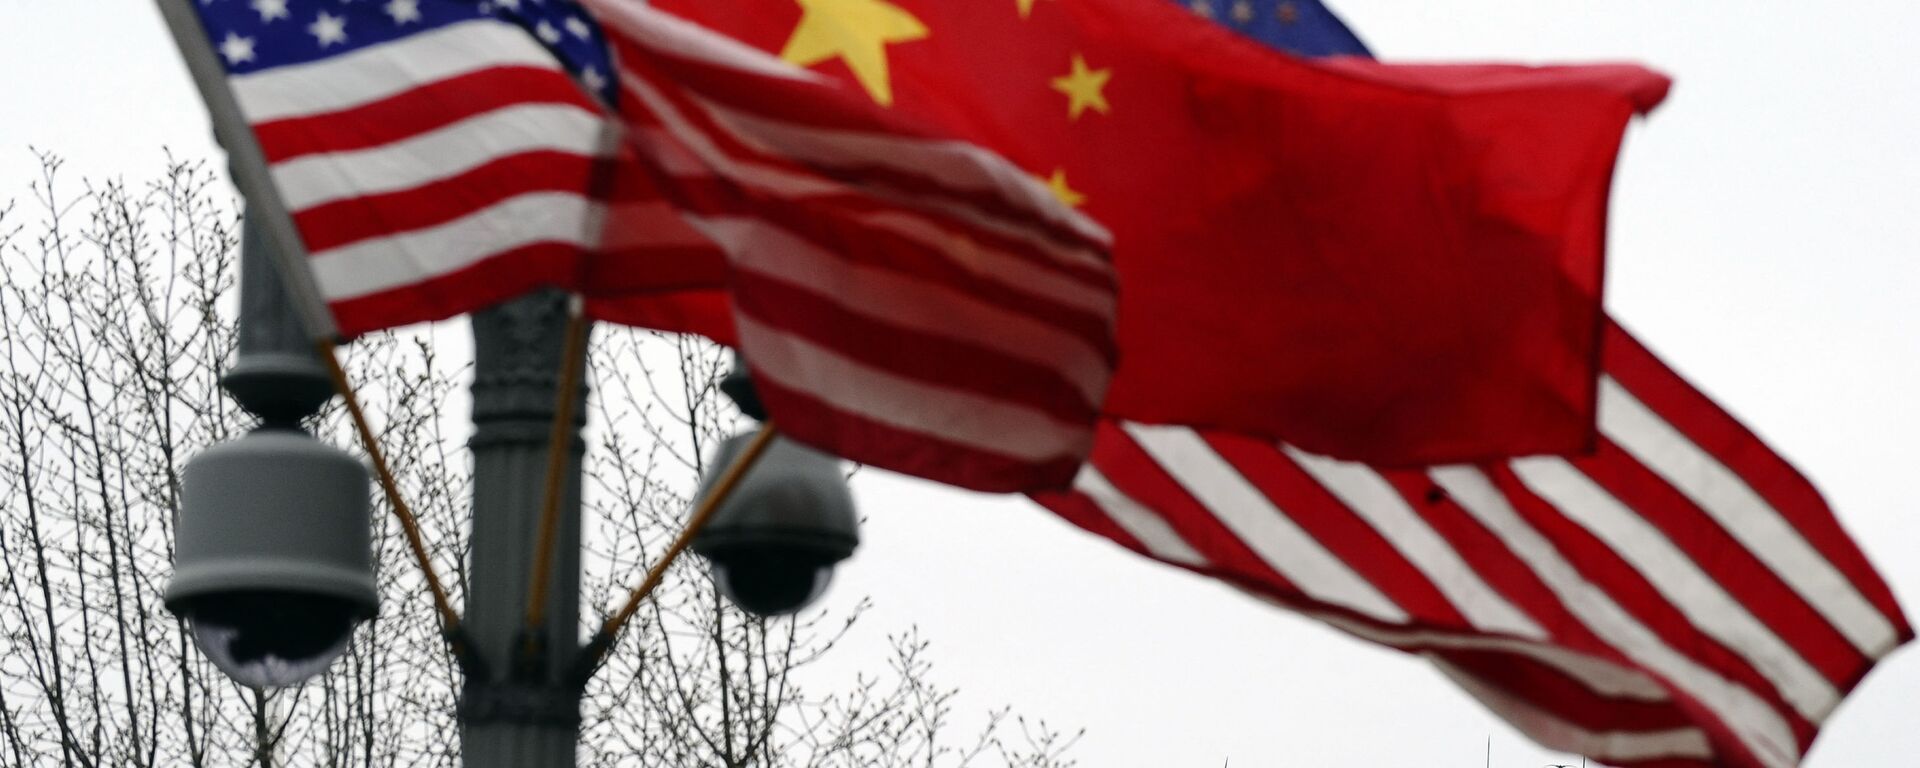 (FILES) In this file photo taken on January 17, 2011, a Secret Service agent guards his post on the roof of the White House as a lamp post is adorned with Chinese and US national flags in Washington, DC - Sputnik International, 1920, 20.05.2022